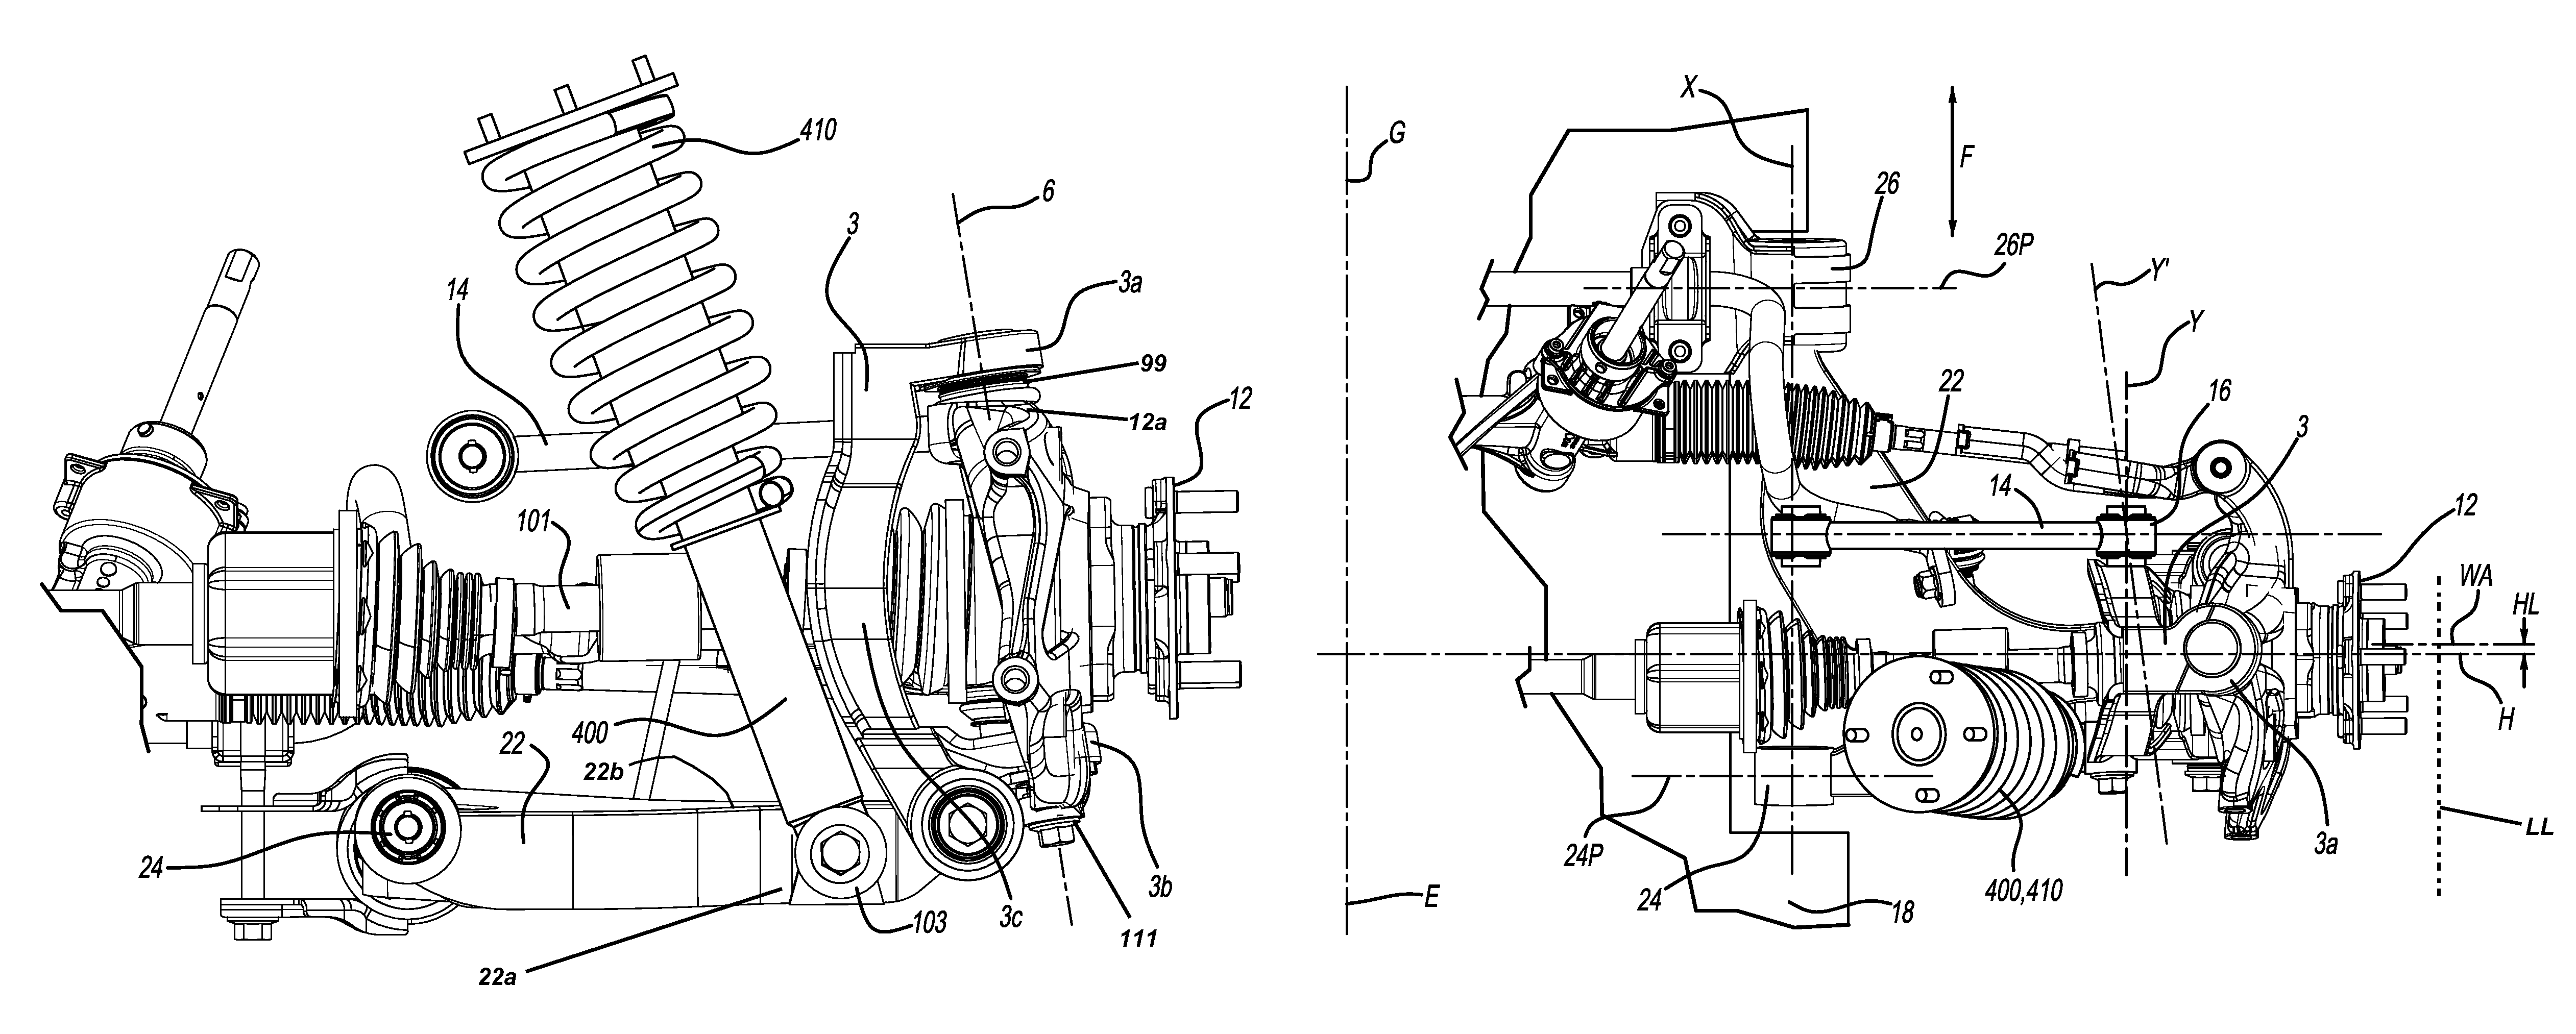 Front wheel suspension for a motor vehicle